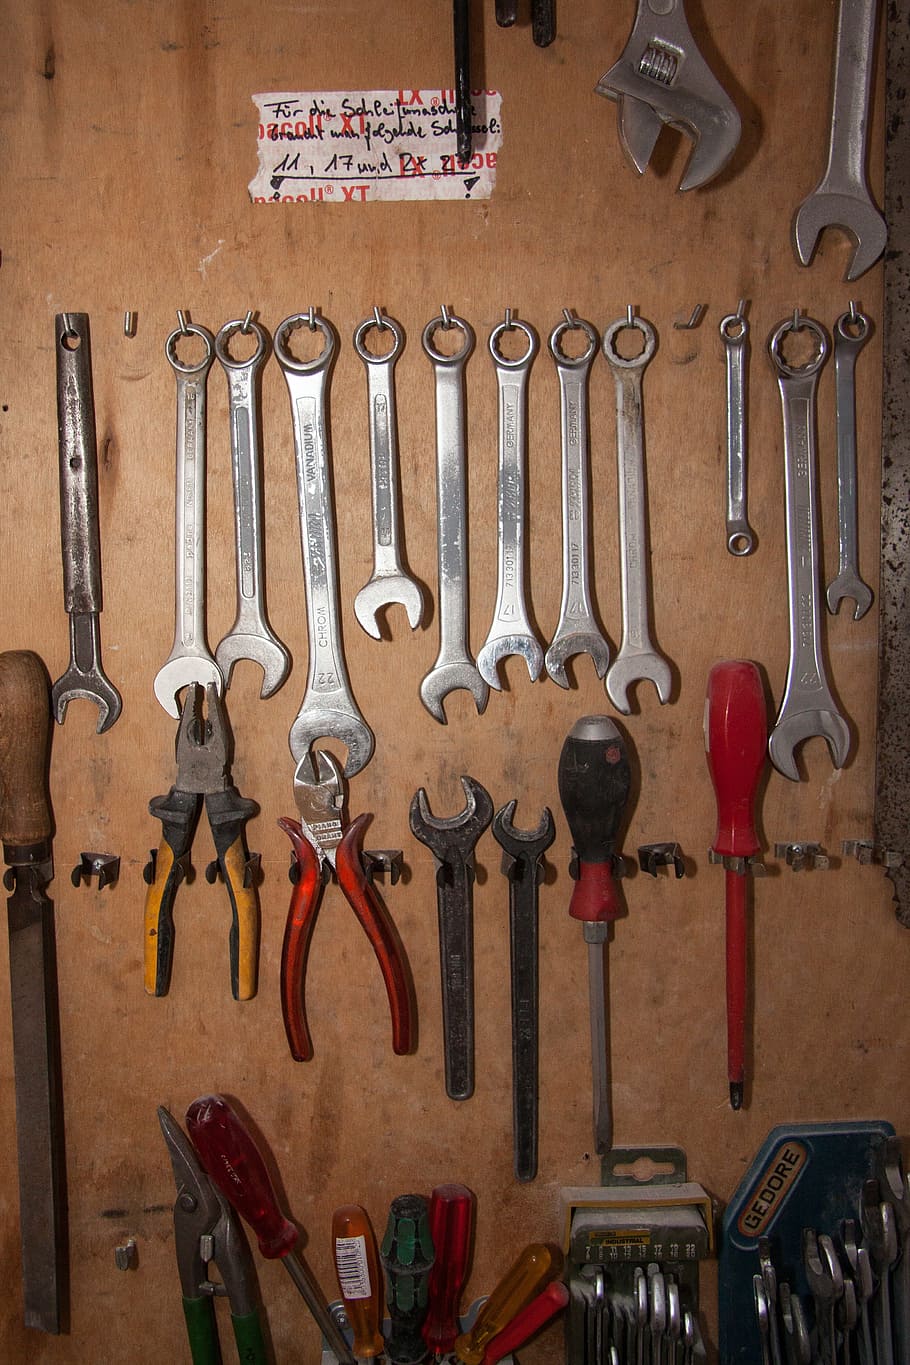 tool wall, tool, storage, wrench, pliers, file, graver, screwdriver, work tool, choice